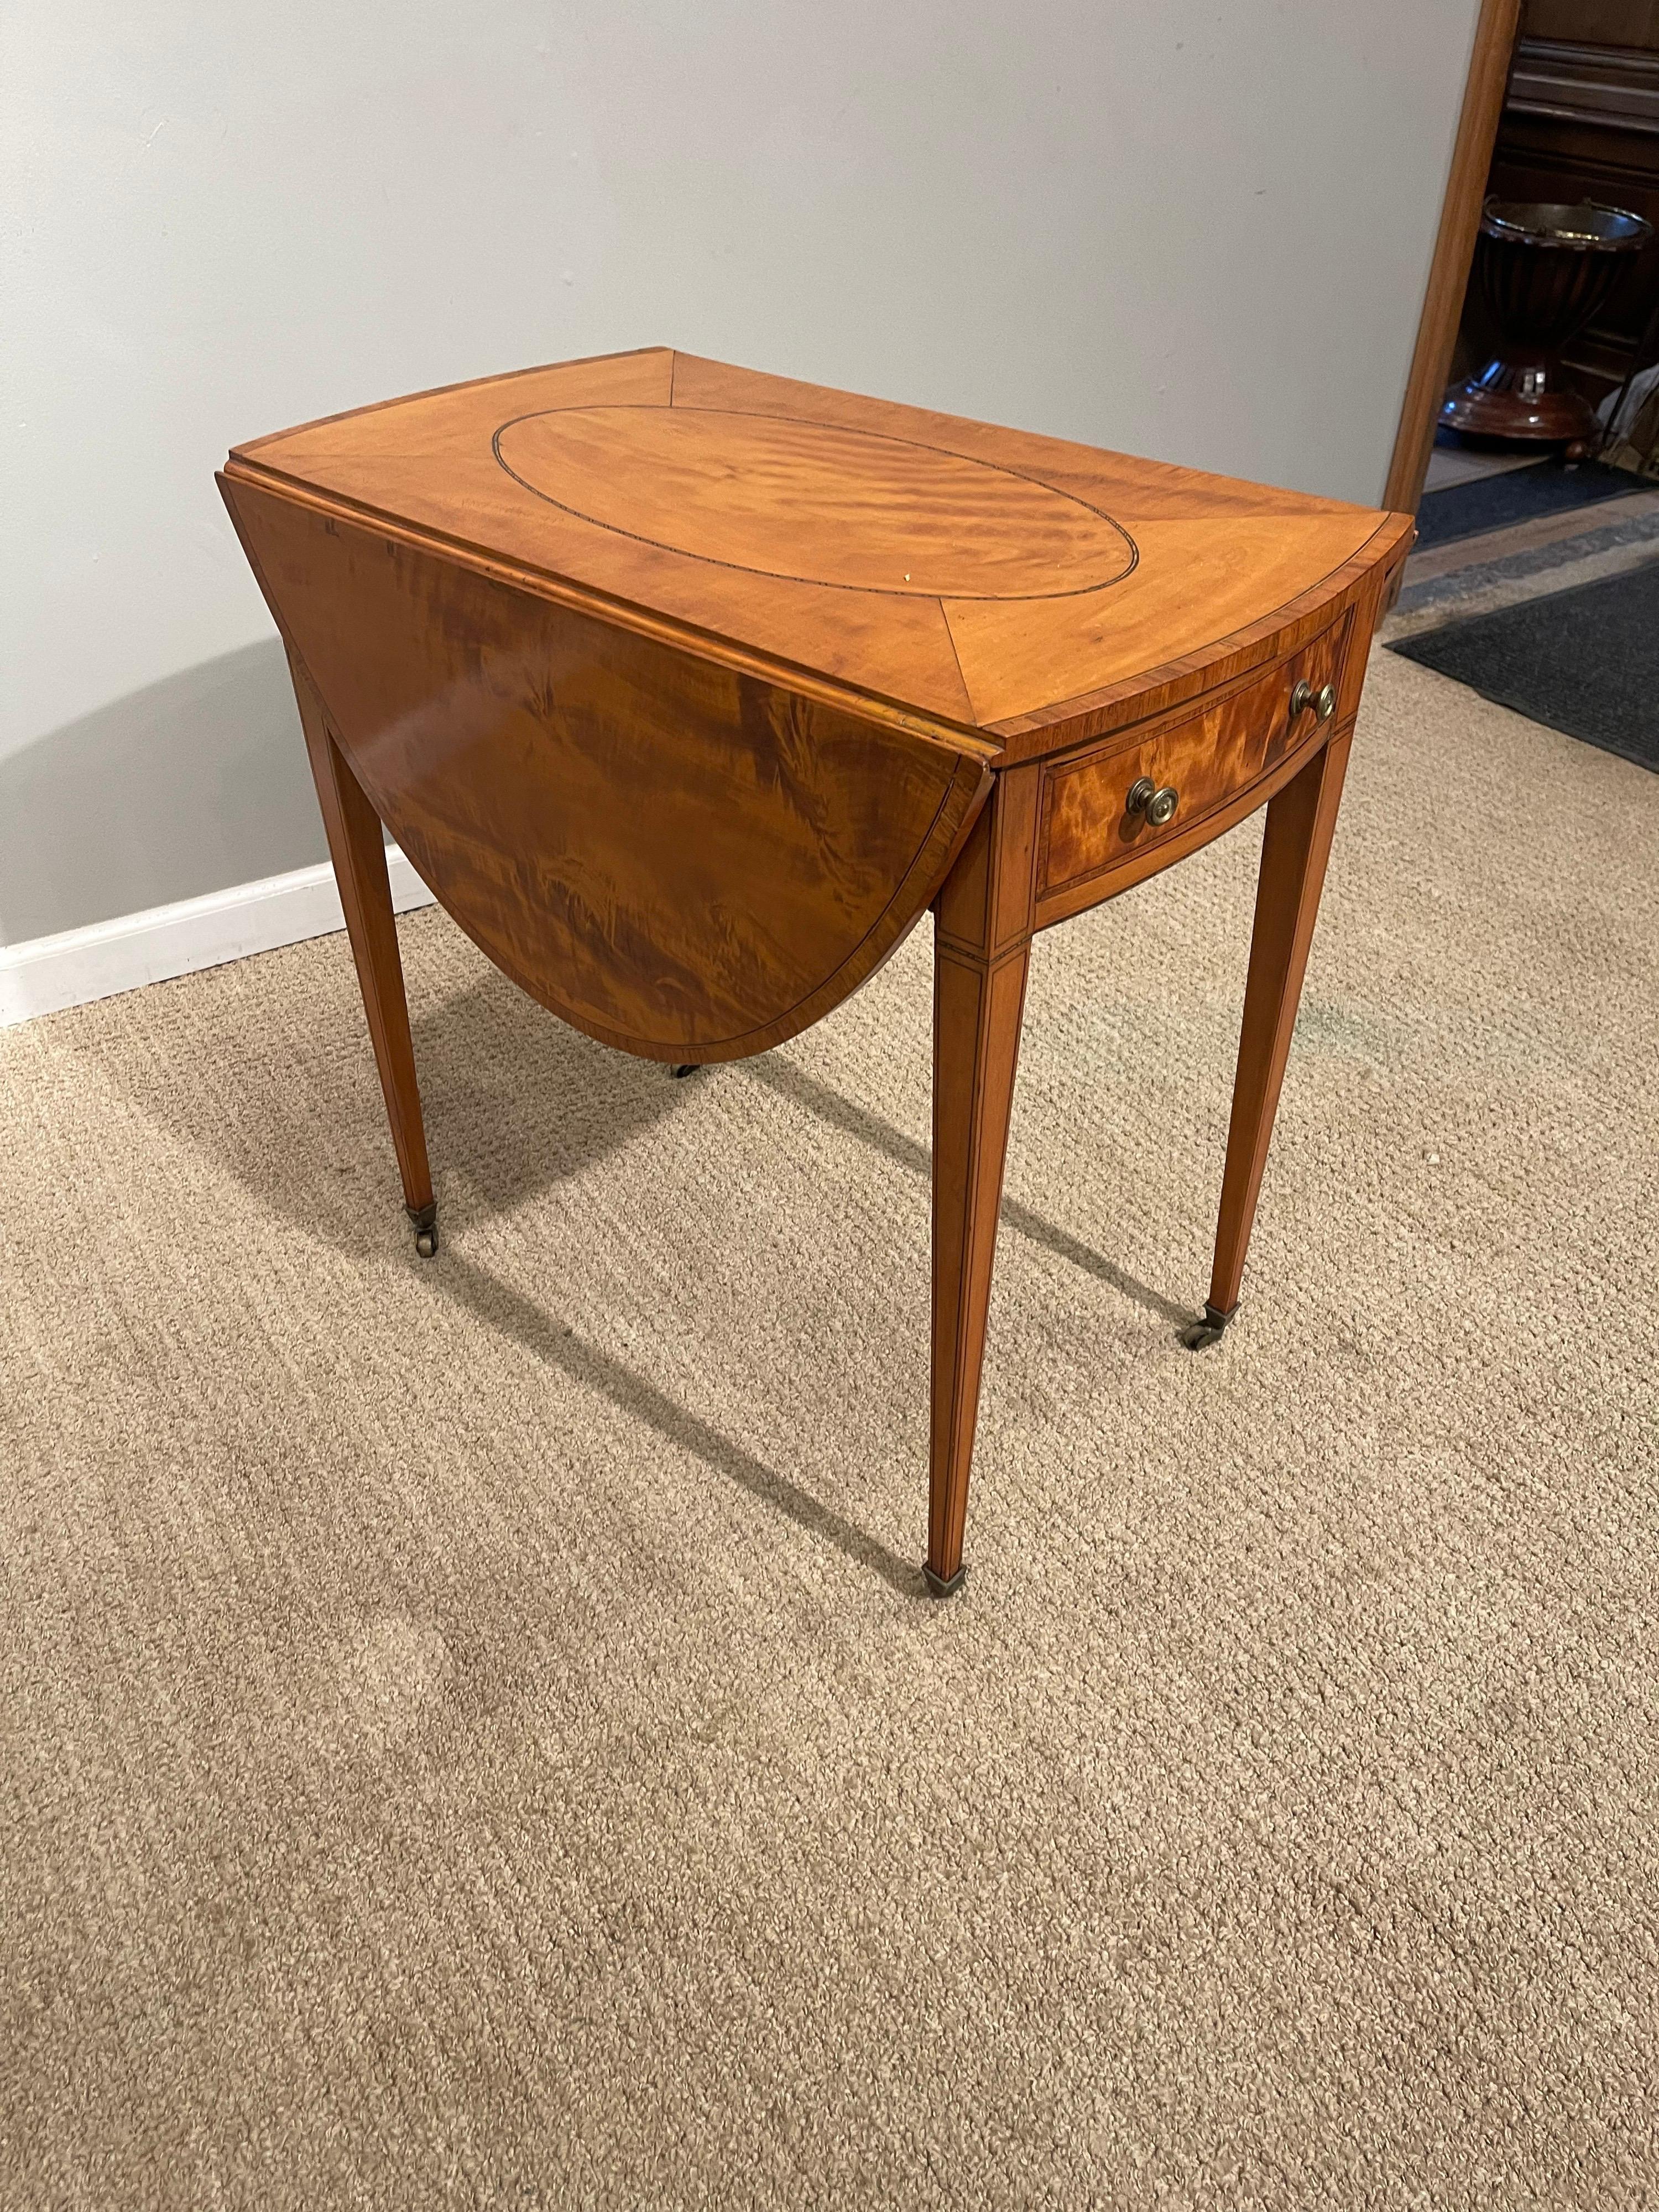 Inlay Oval Sheraton Satinwood Pembroke Table, Circa 1790 For Sale